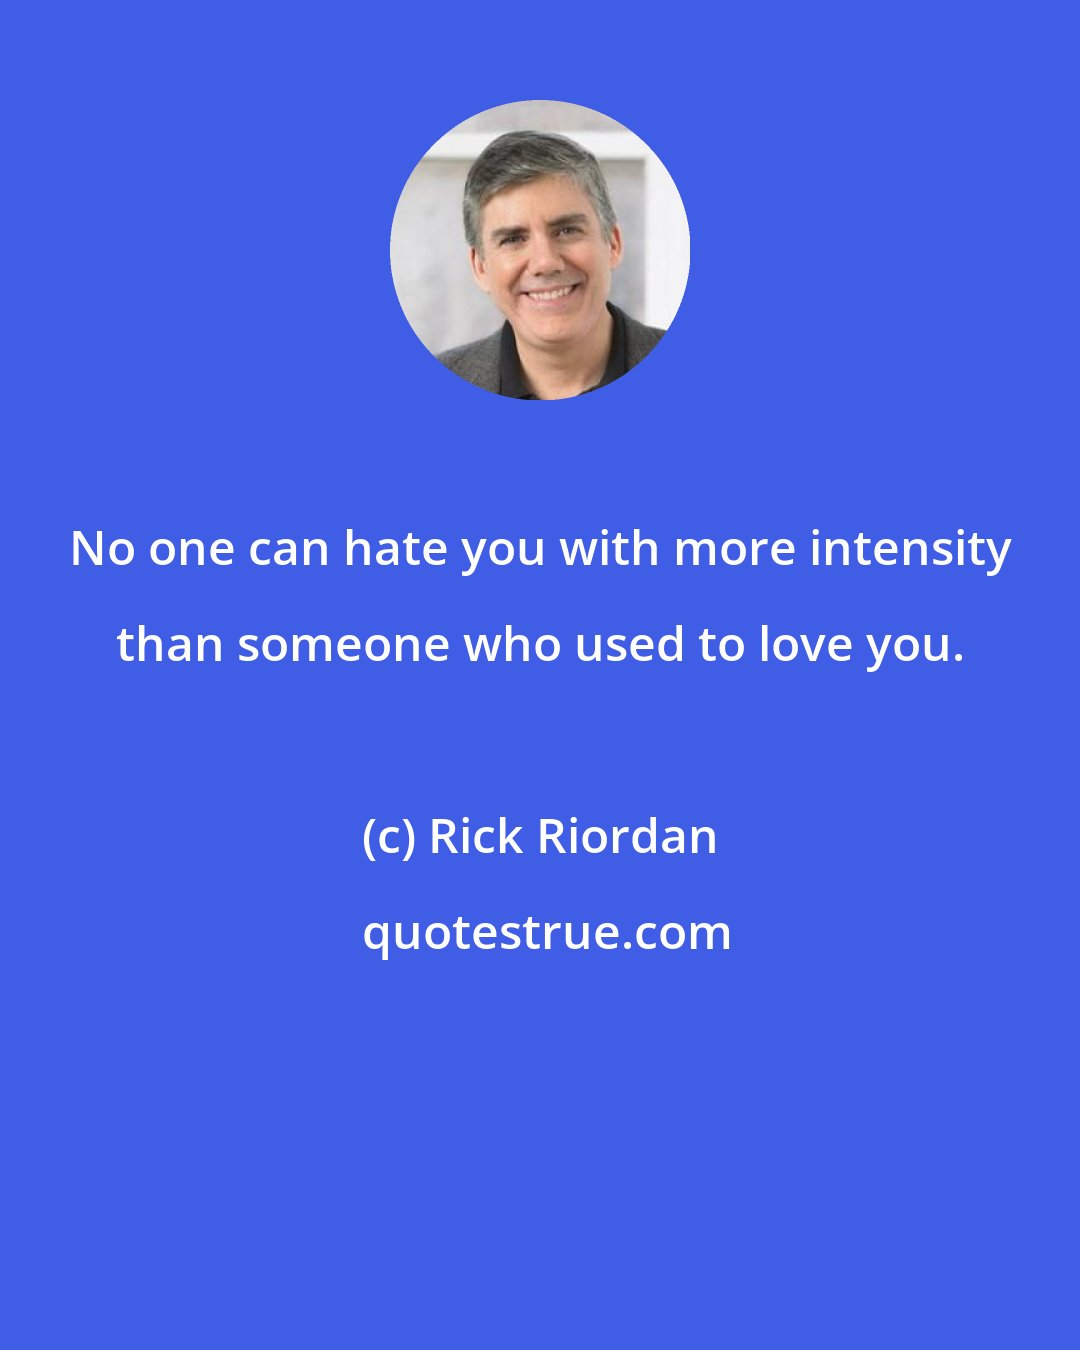 Rick Riordan: No one can hate you with more intensity than someone who used to love you.